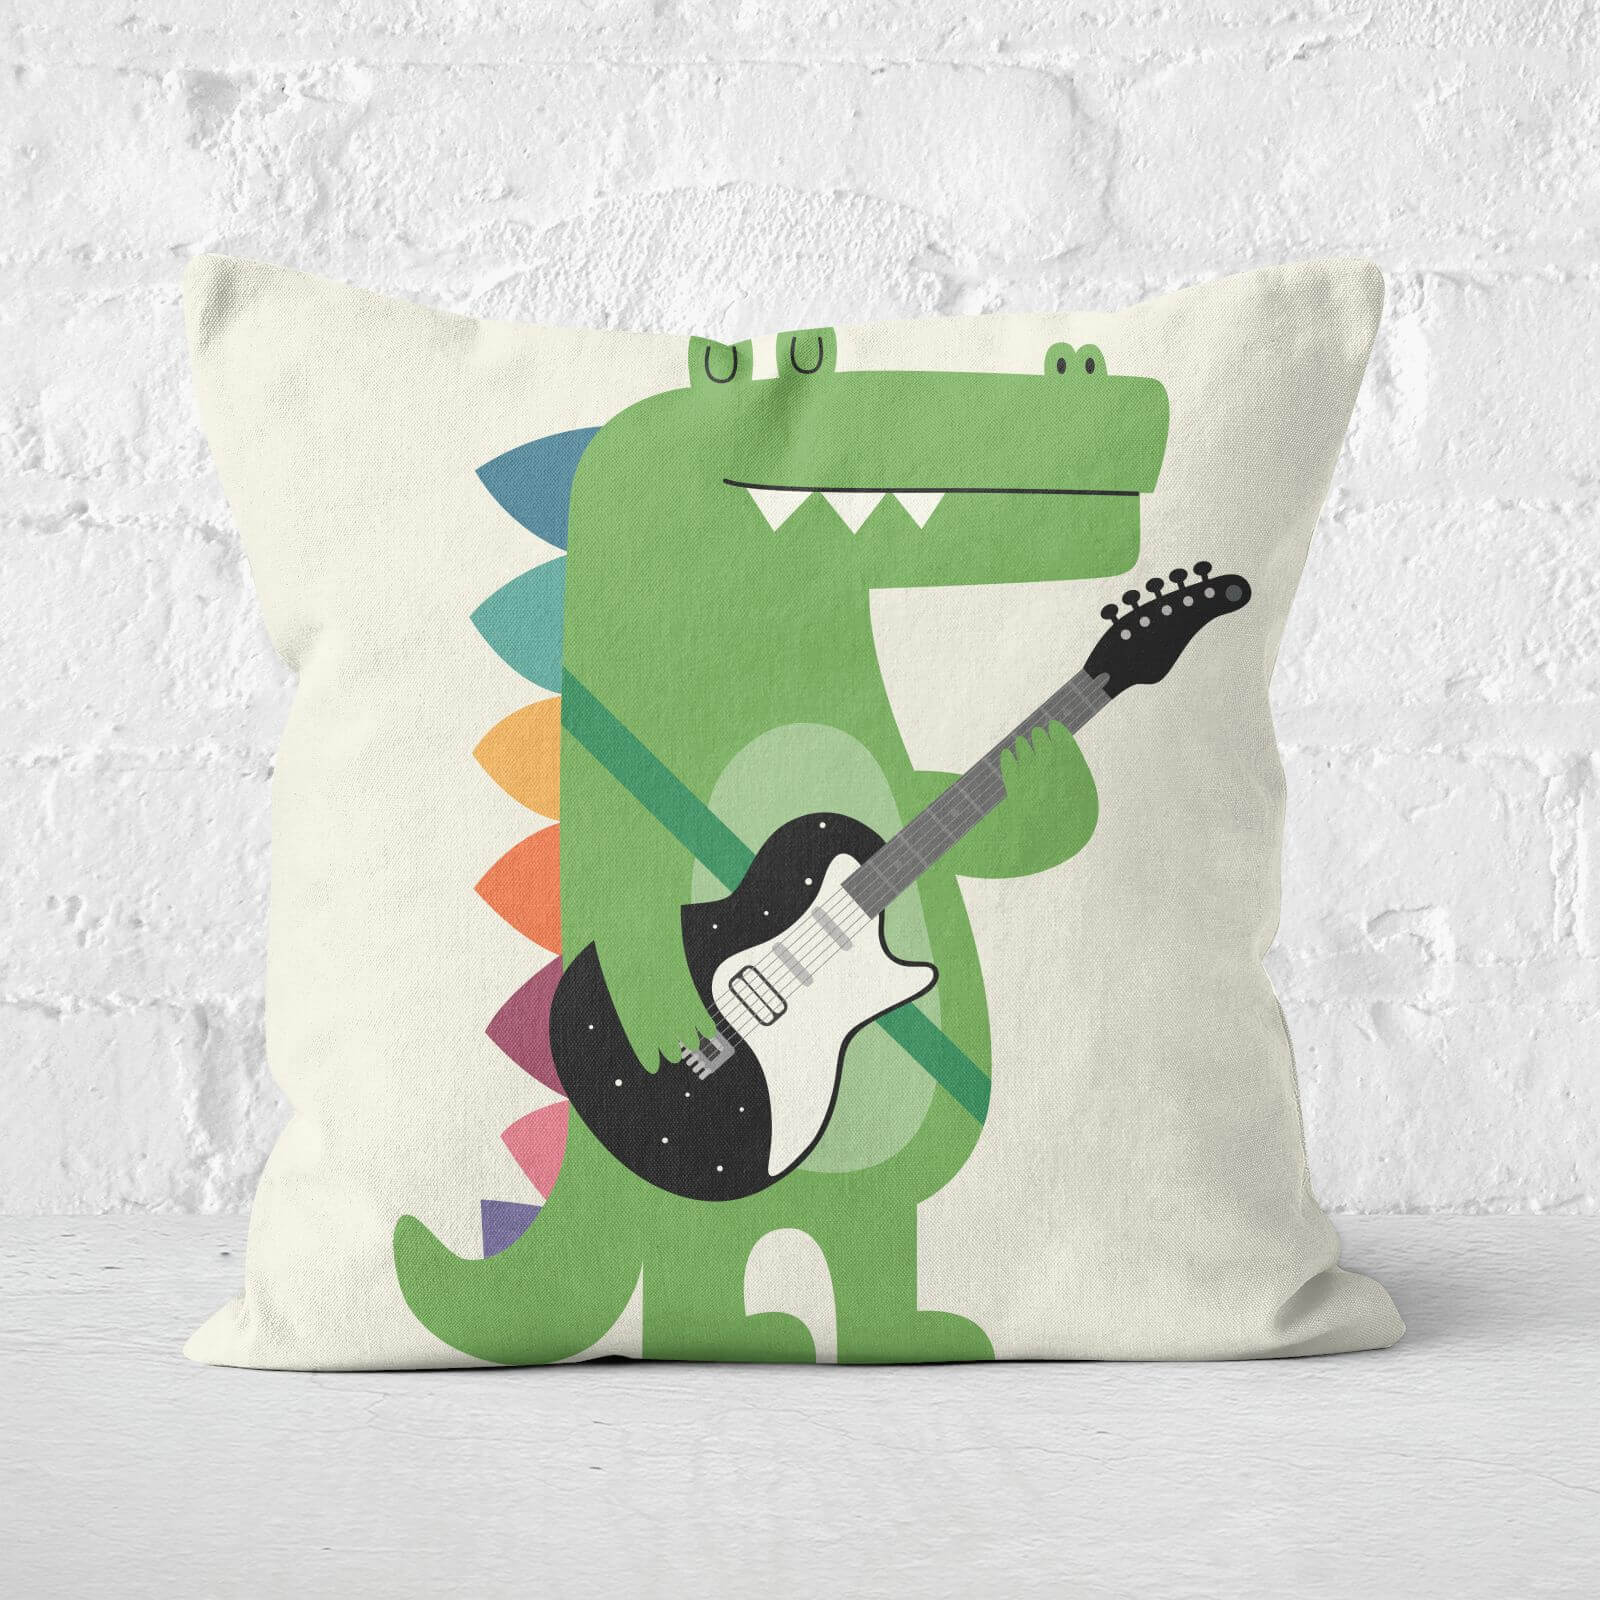 Andy Westface Croco Rock Square Cushion - 60x60cm - Soft Touch